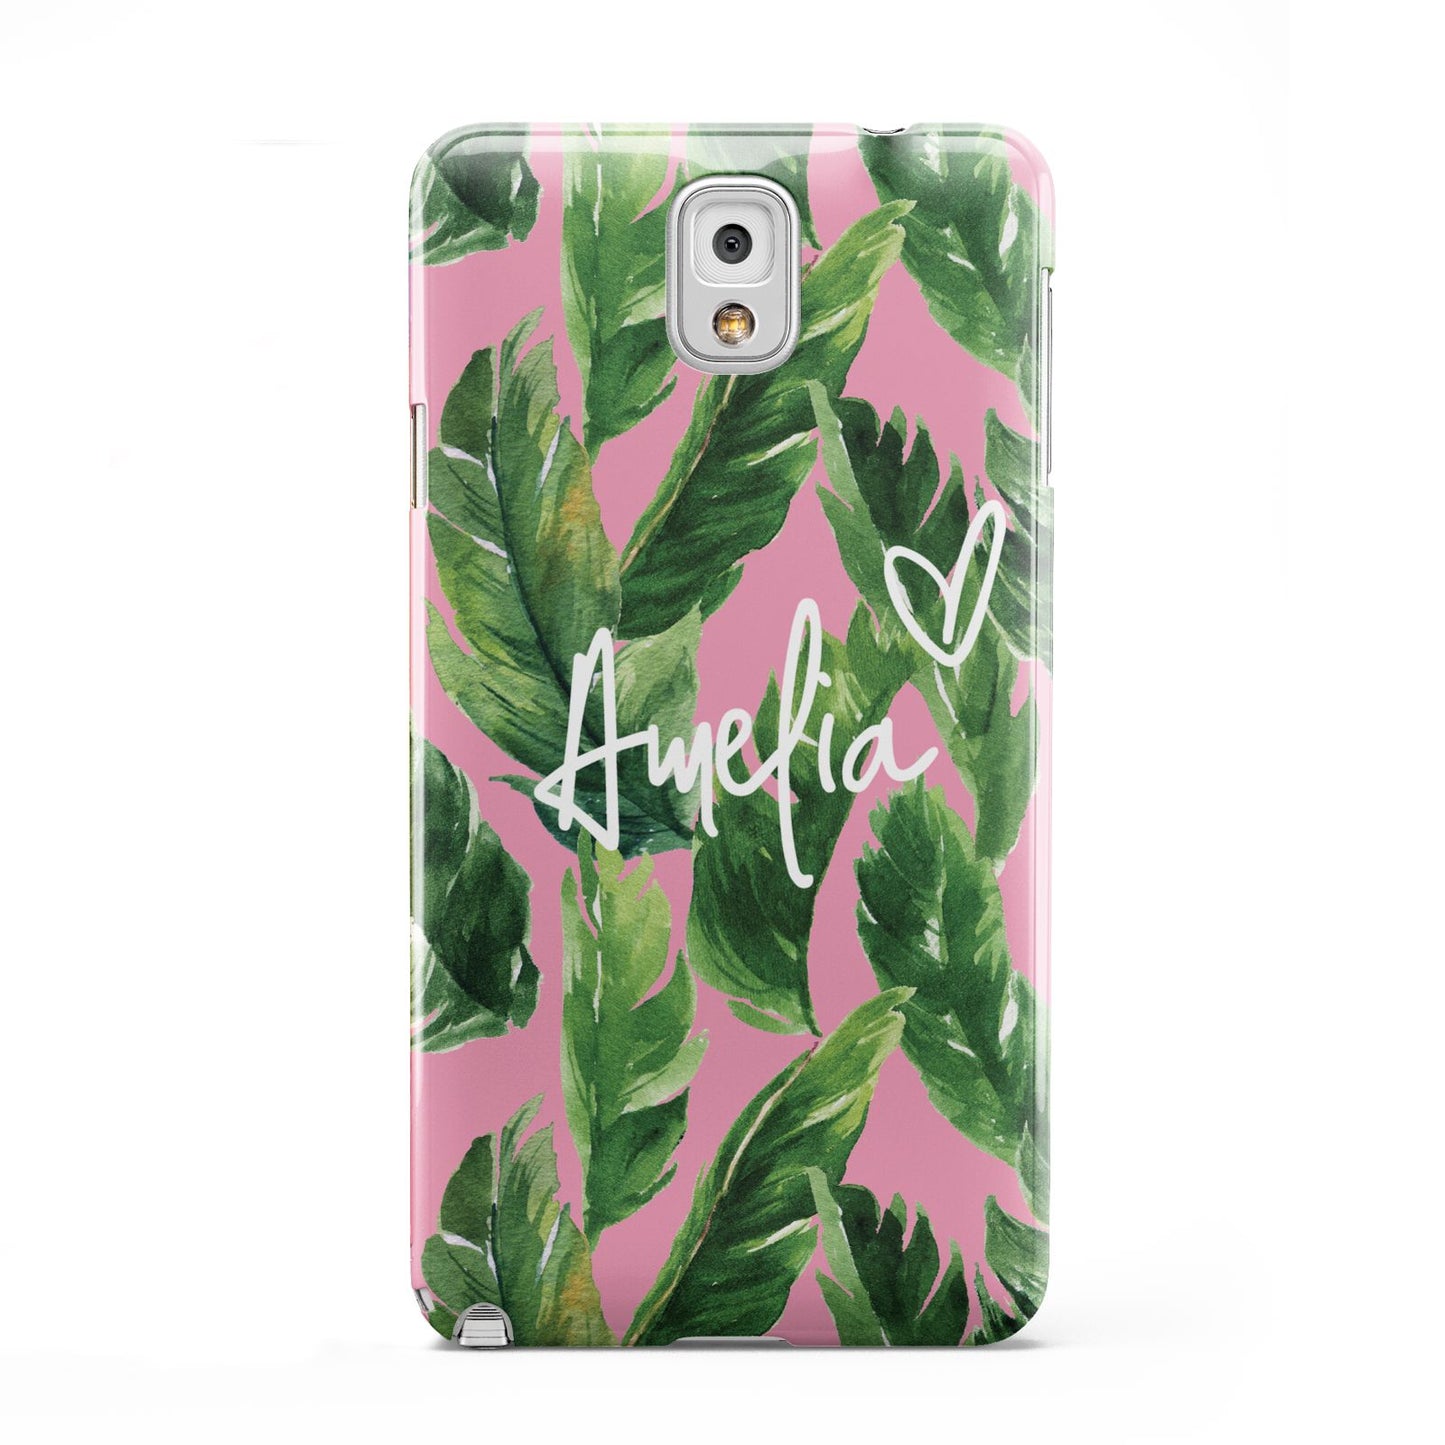 Personalised Pink Green Banana Leaf Samsung Galaxy Note 3 Case